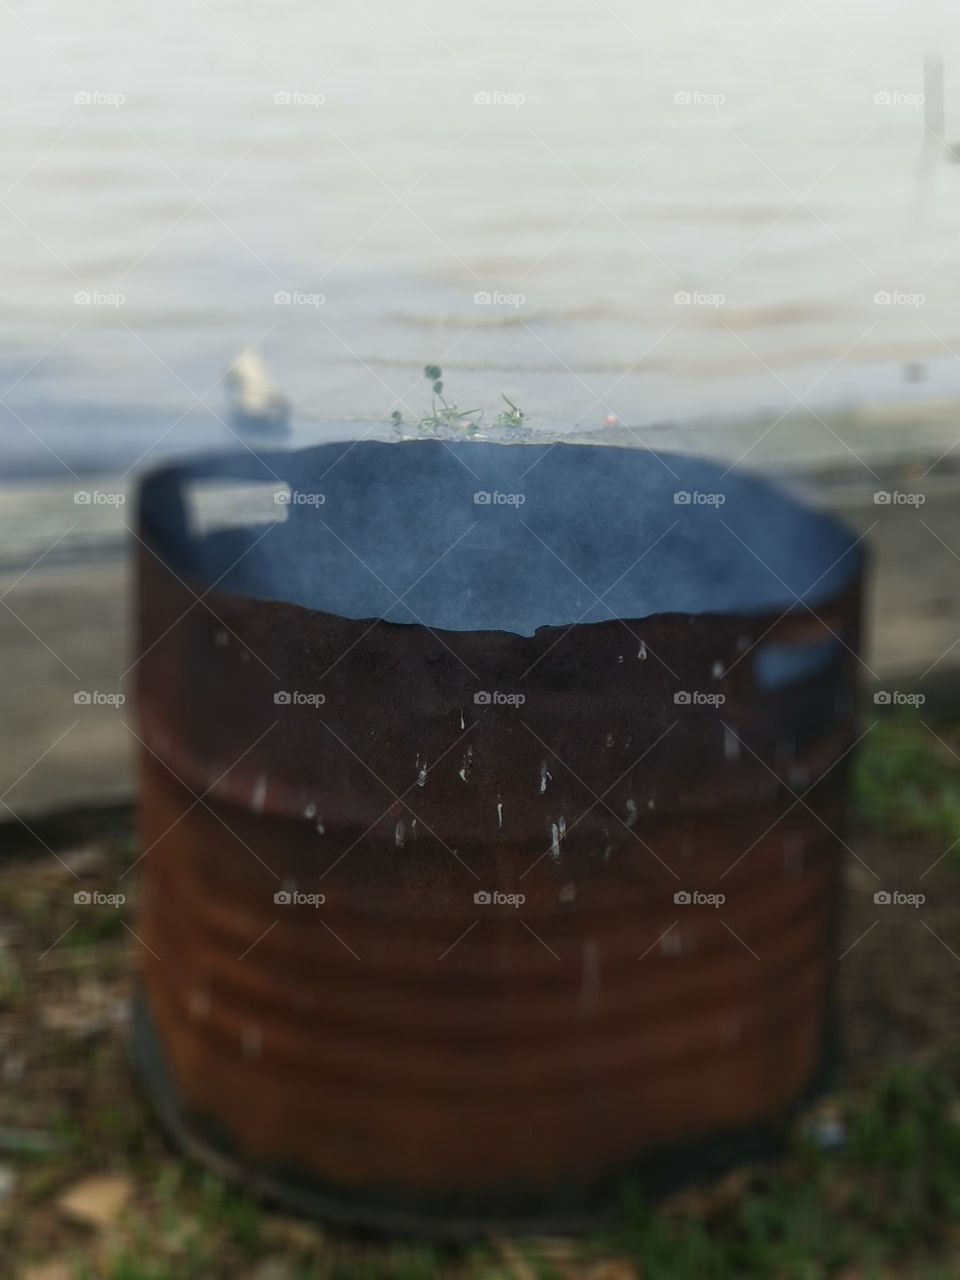 Barrel, Container, No Person, Wood, Outdoors